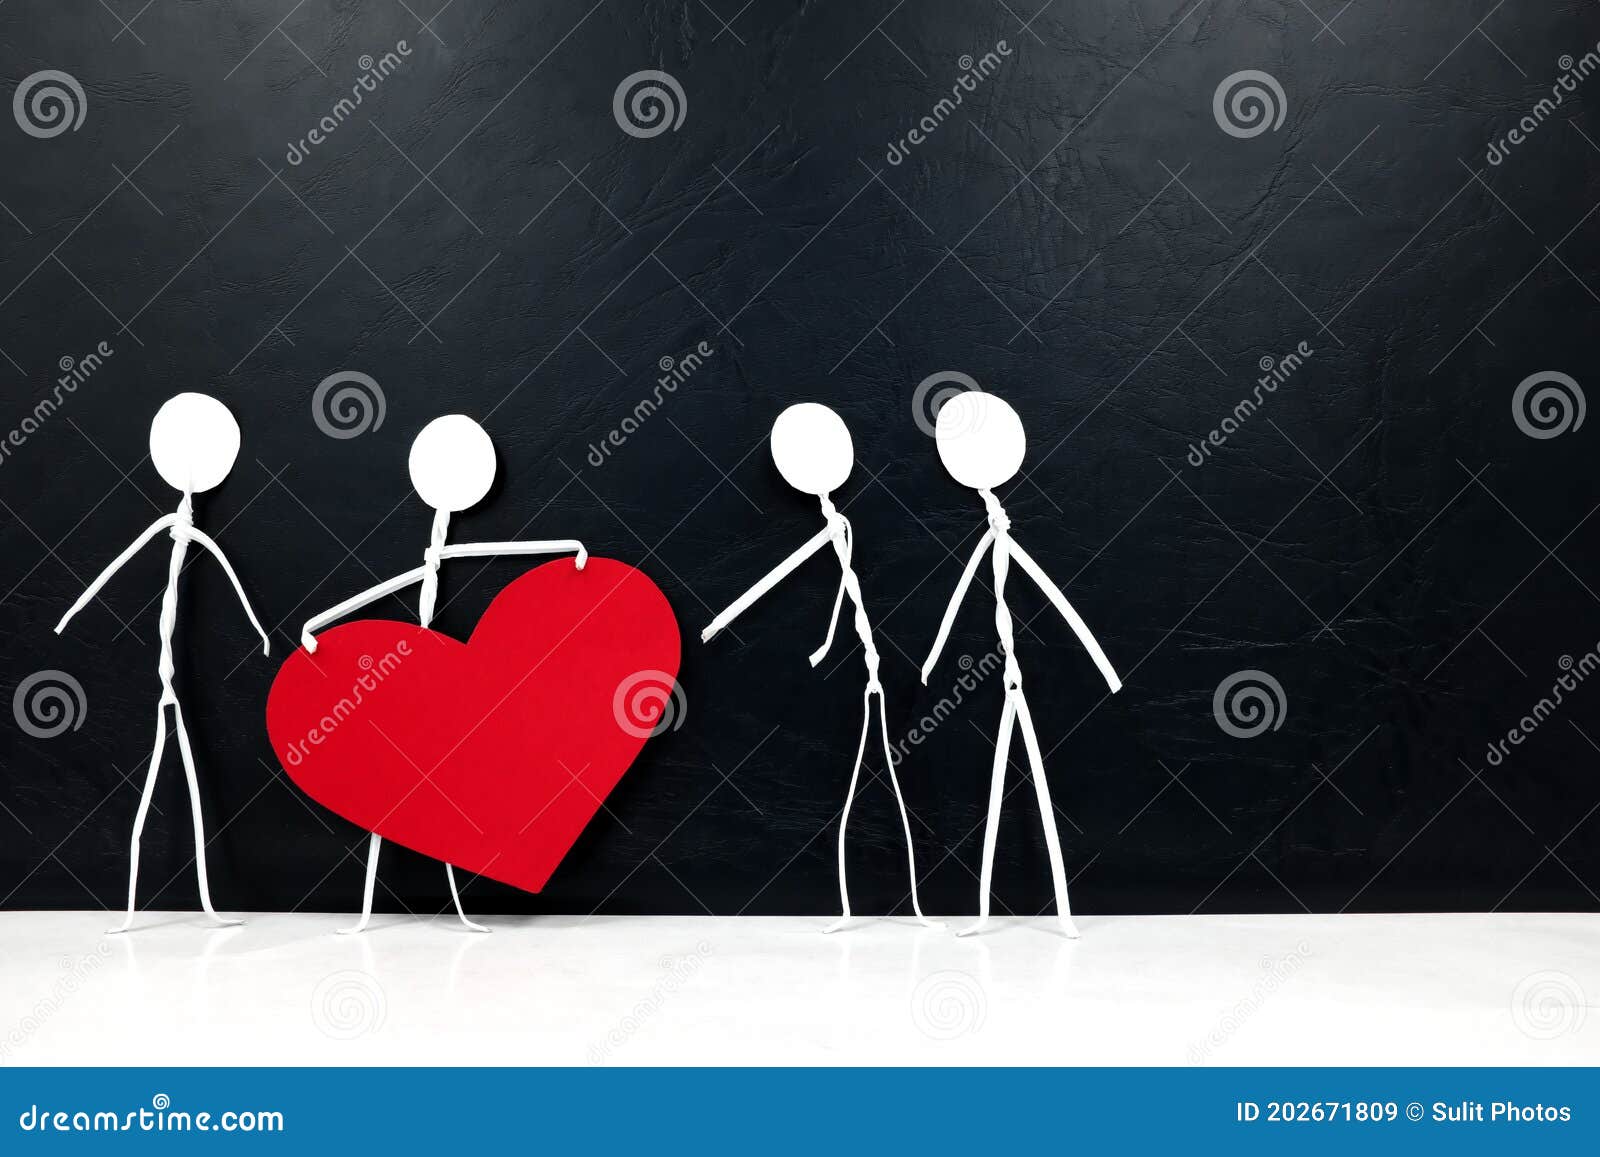 stick man holding big red heart  while giving to other people. share love and kindness, give hope, helping others concept.